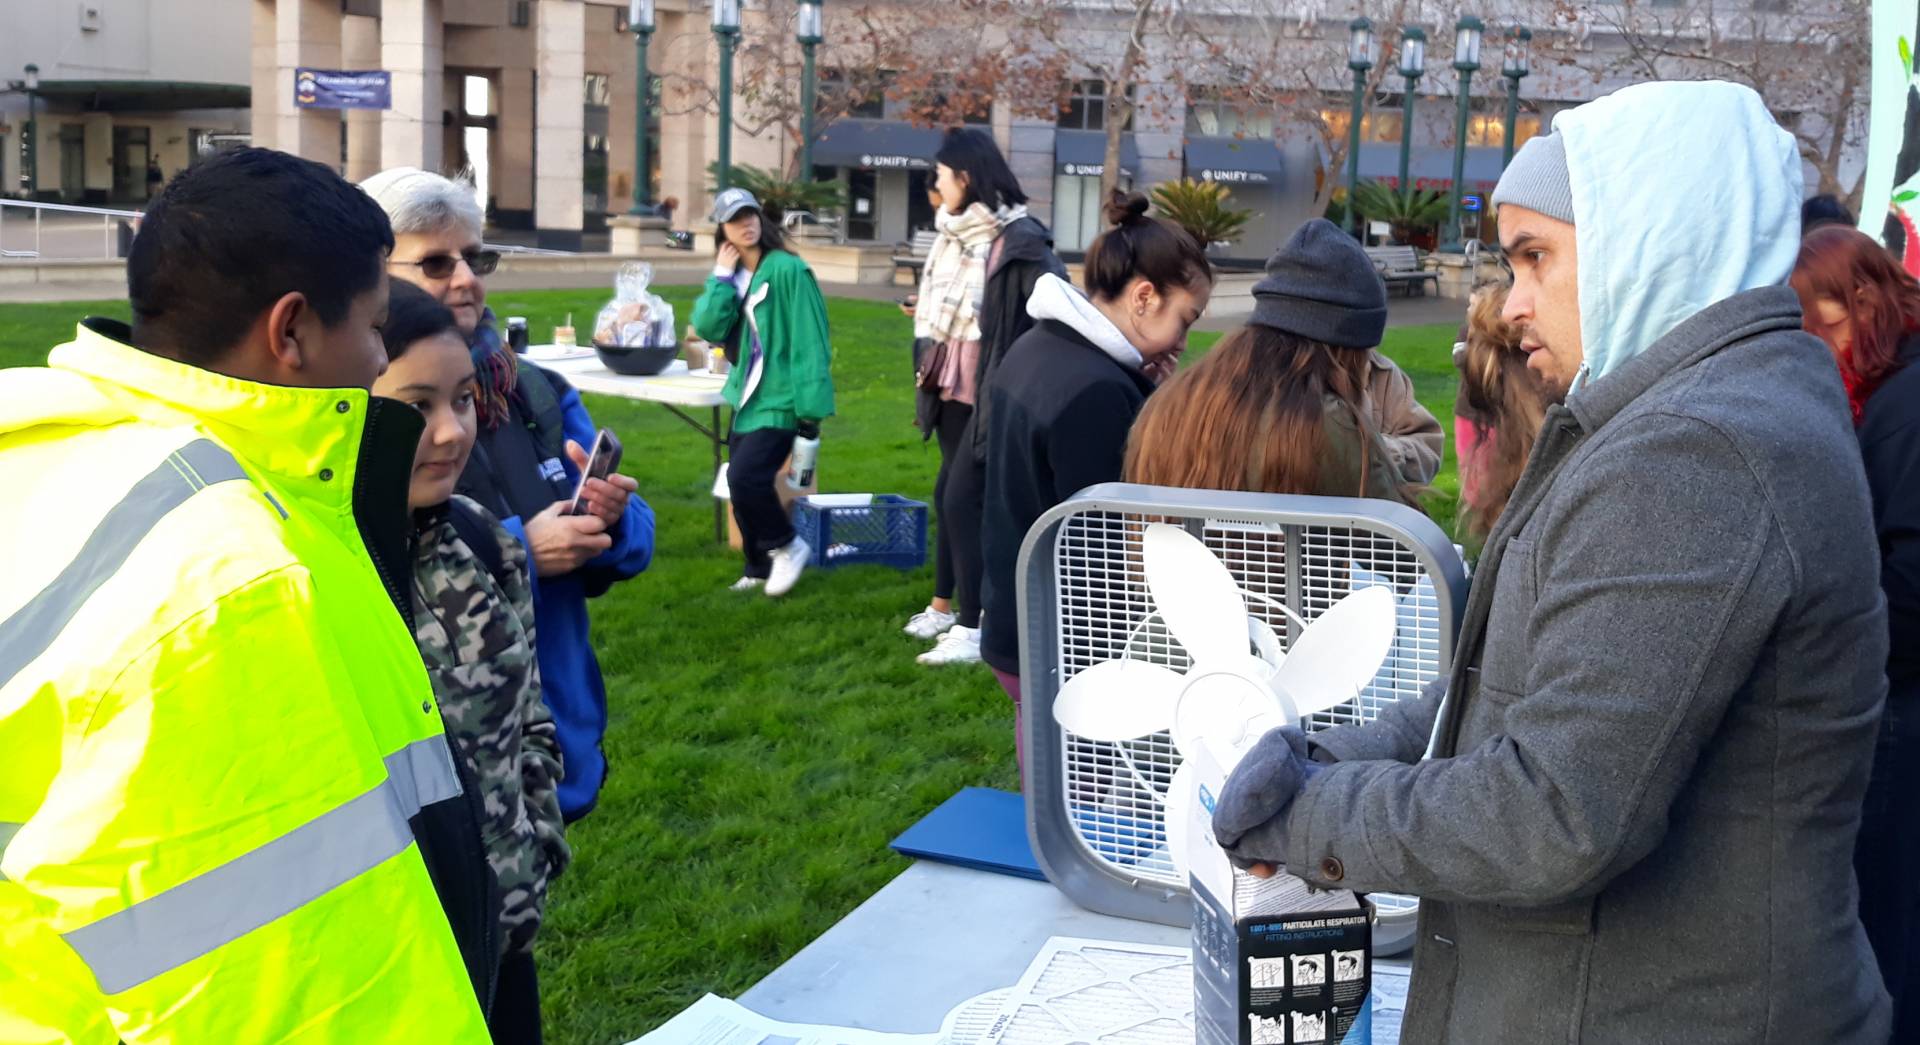 Dani Cornejo, an educator with the Mycelium Youth Network, teaches young people how to make their own air purifiers out of a box fan and air filter at a climate change event in Oakland in January. Lil Milagro Henriquez/Mycelium Youth Network